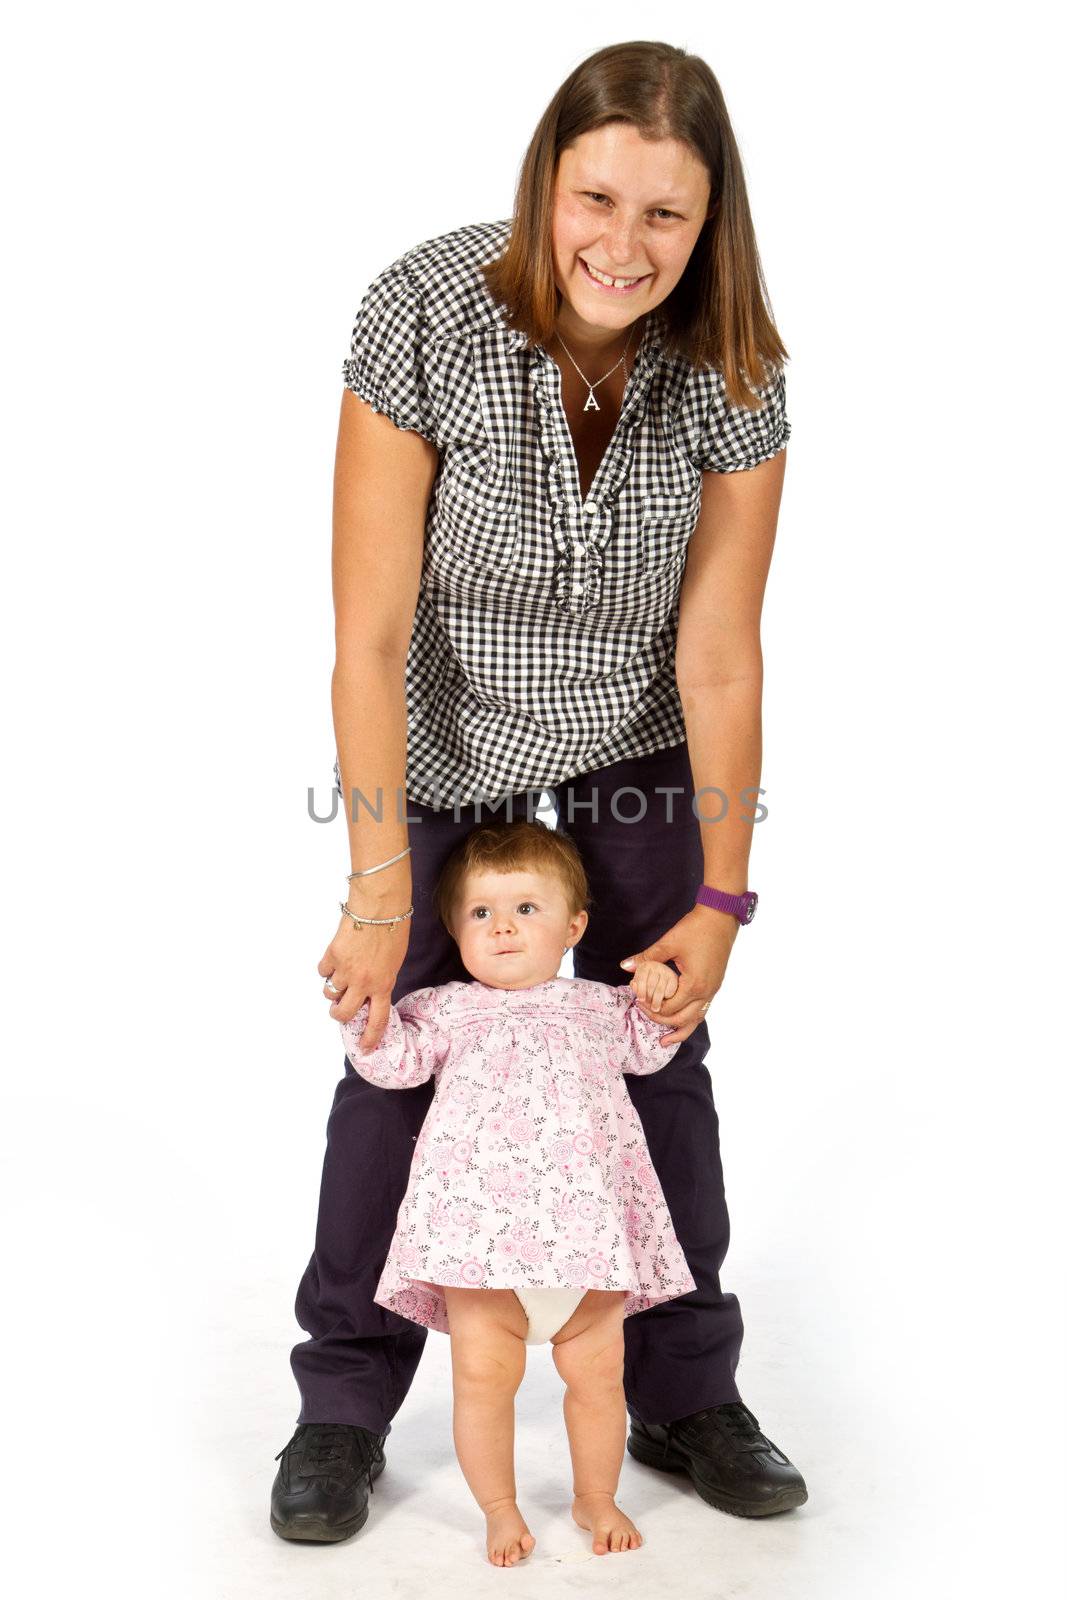 baby taking first steps with mother help on white background 